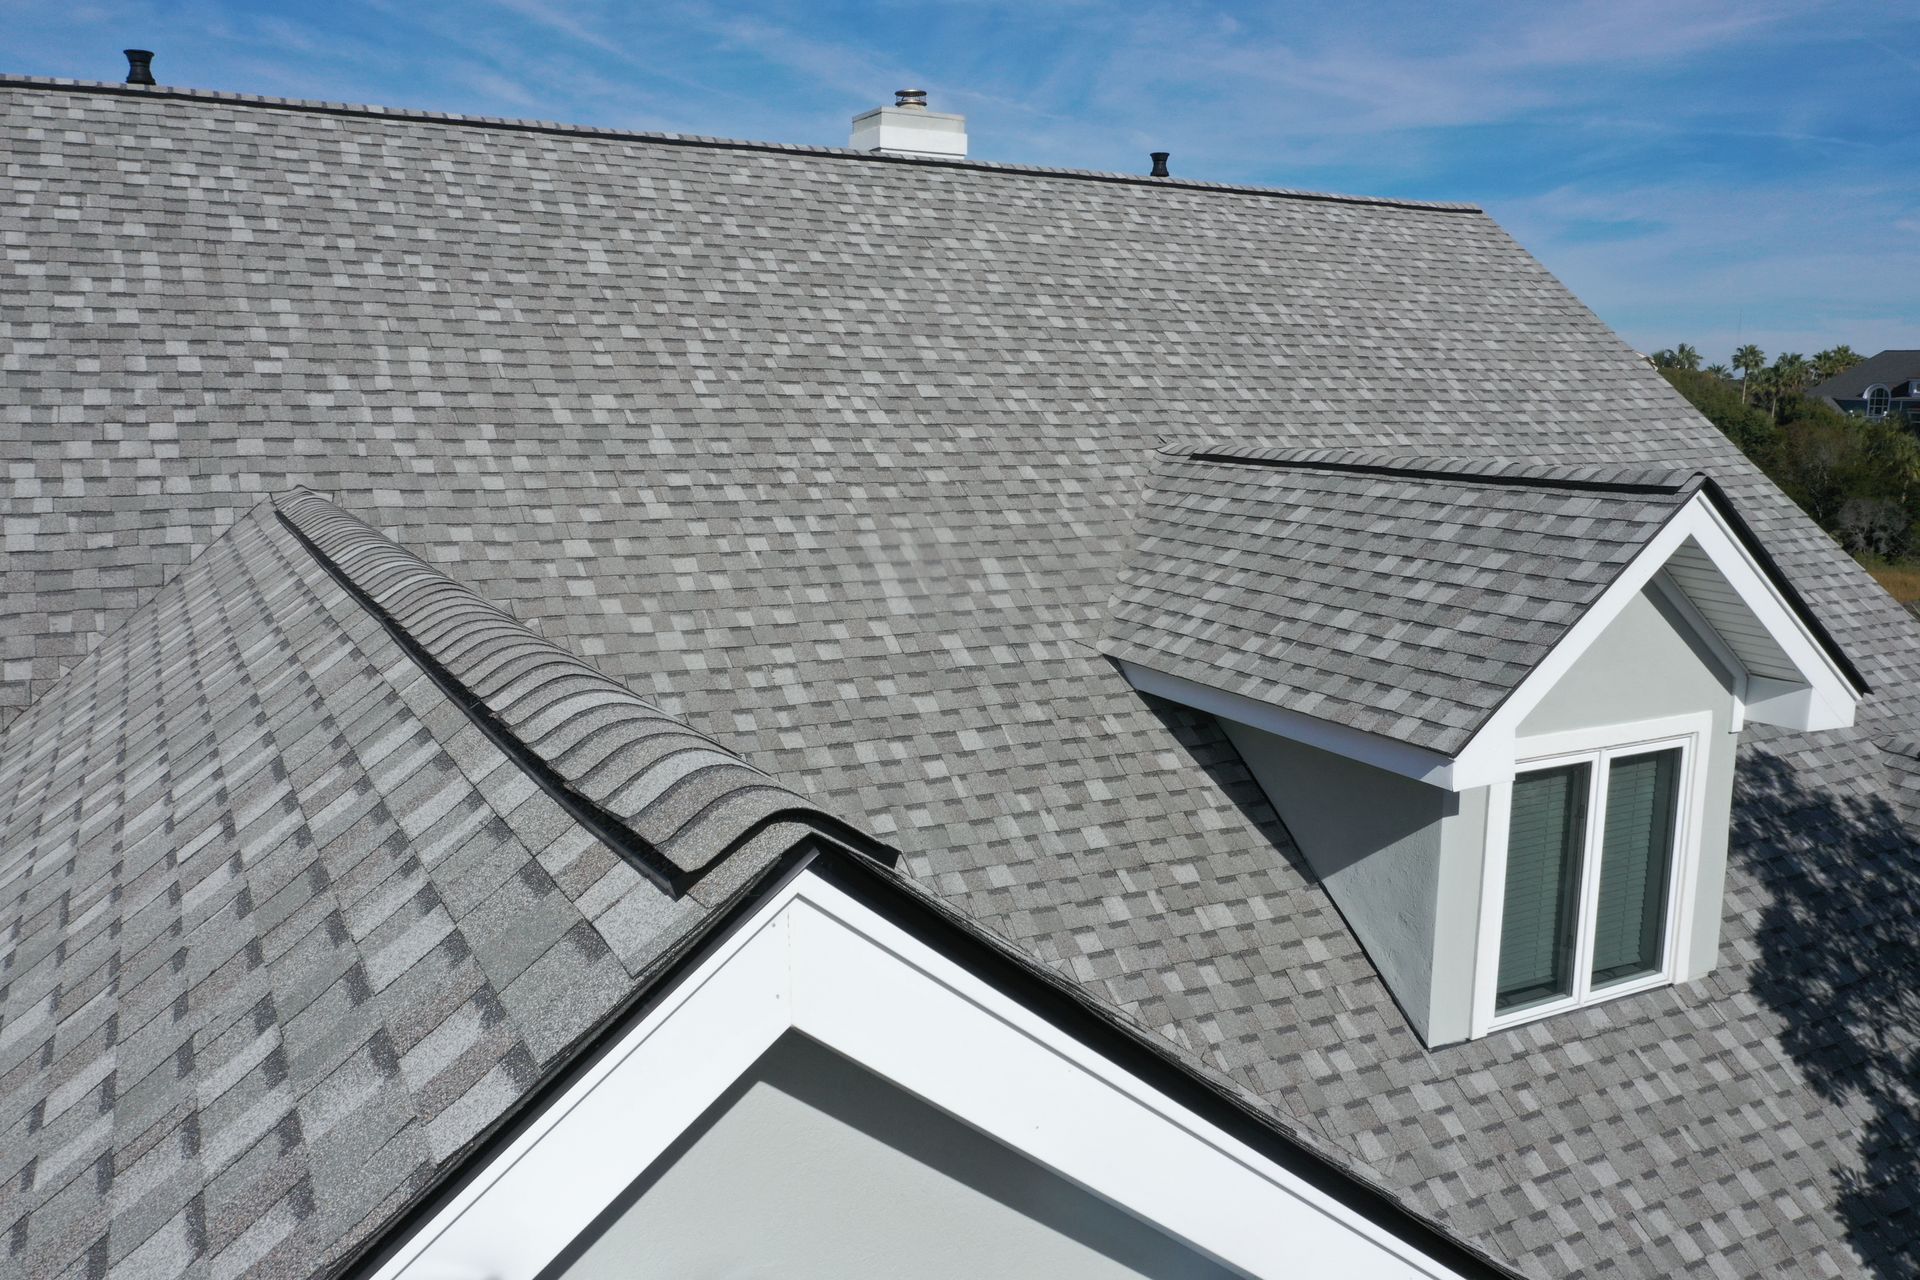 Residential roof with asphalt shingles